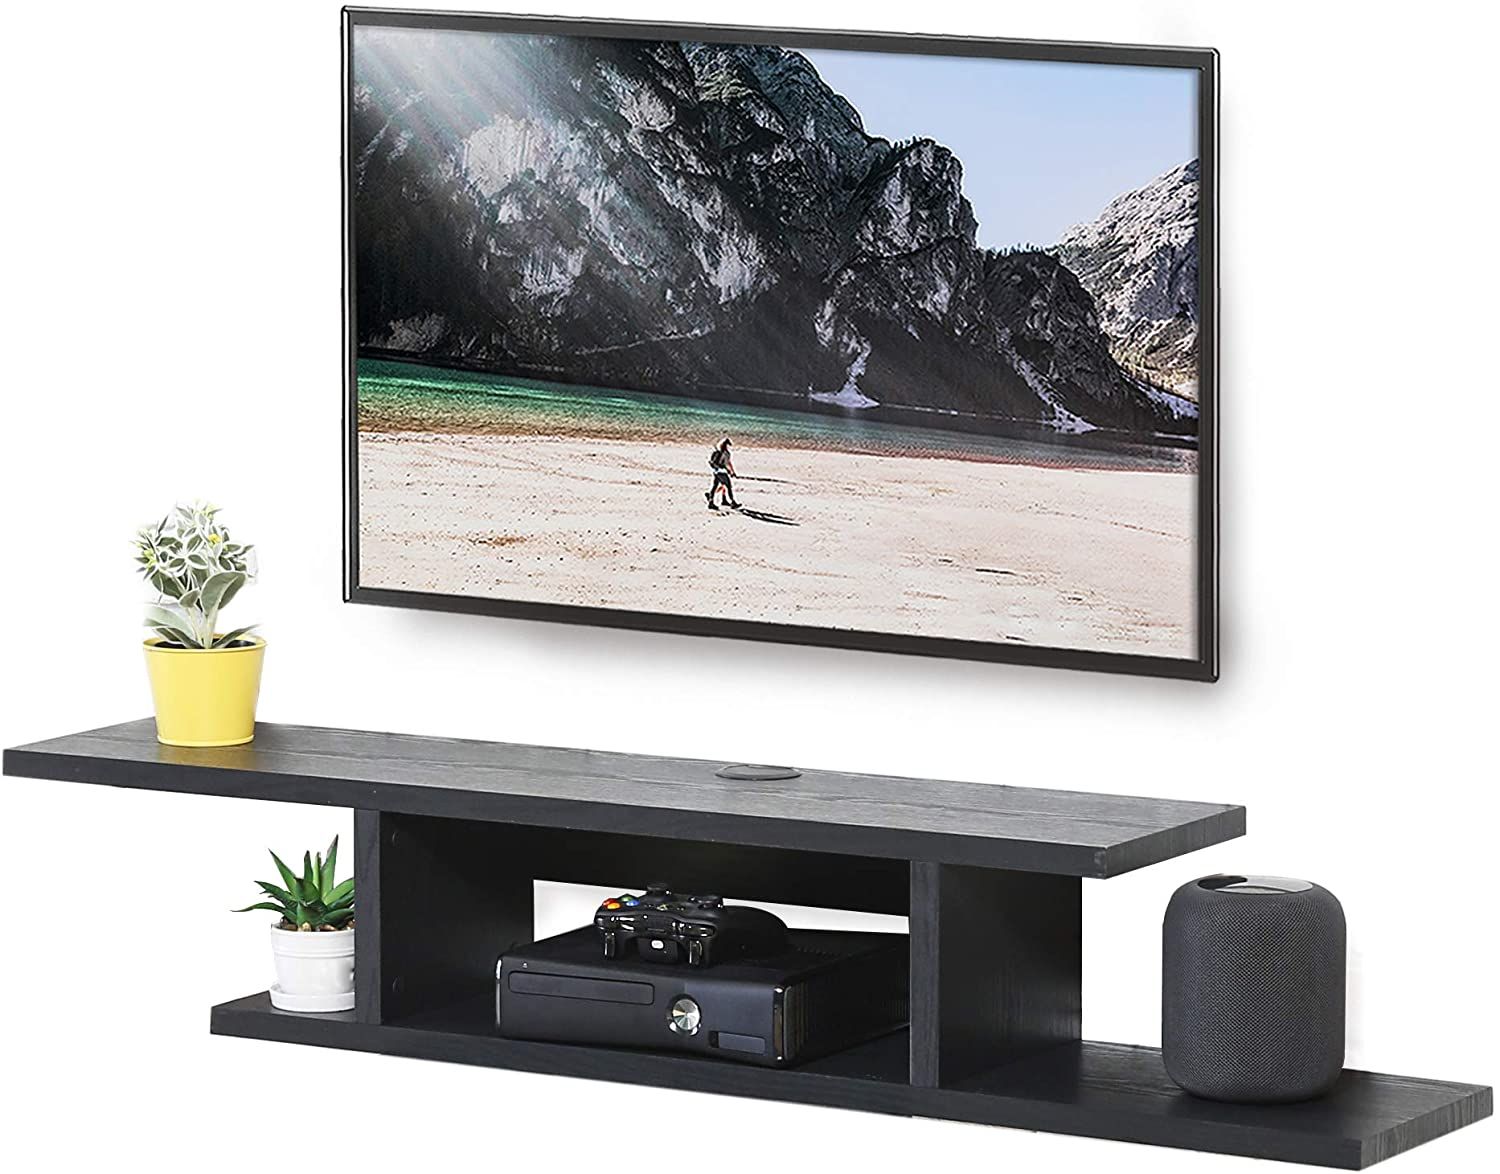 Fitueyes Floating Tv Stand Wall Mounted Audio/video With Regard To Console Under Wall Mounted Tv (View 7 of 15)